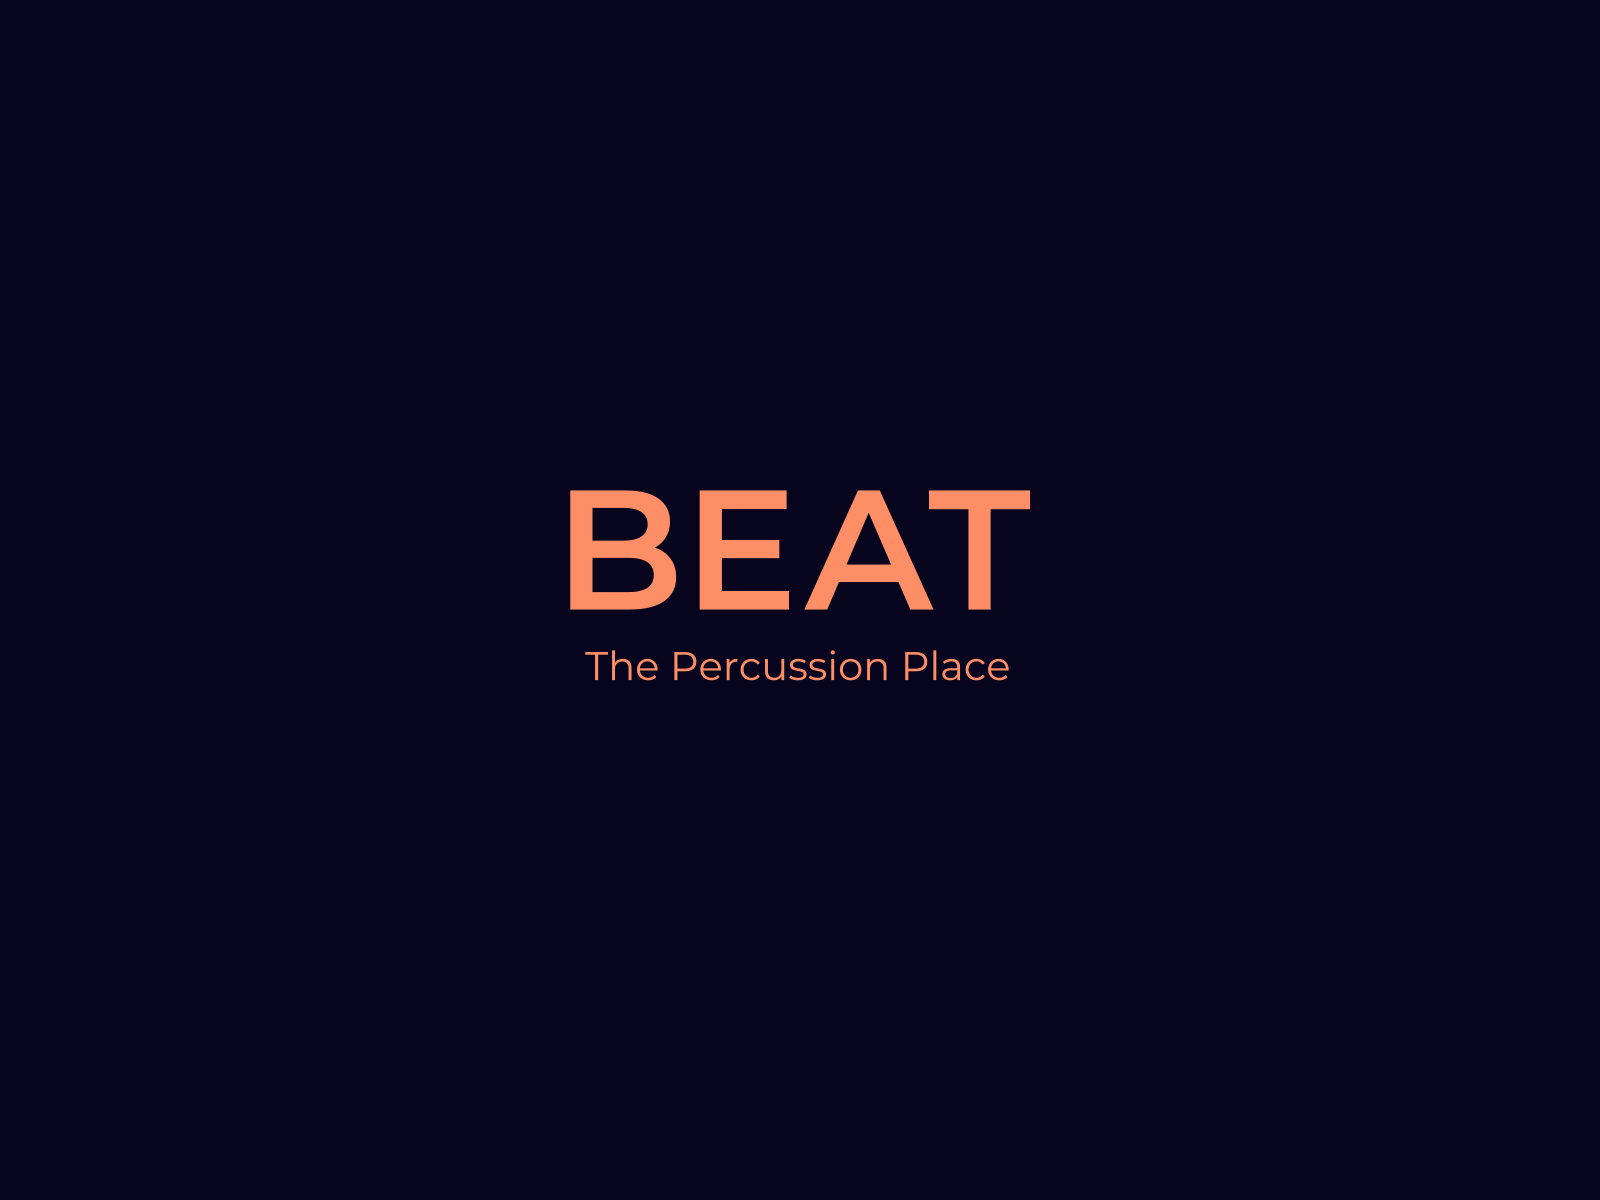 Beat - Logo animation - CONTAINS FLASHING IMAGES. animation design george yong graphic logo mograph motion professional reveal